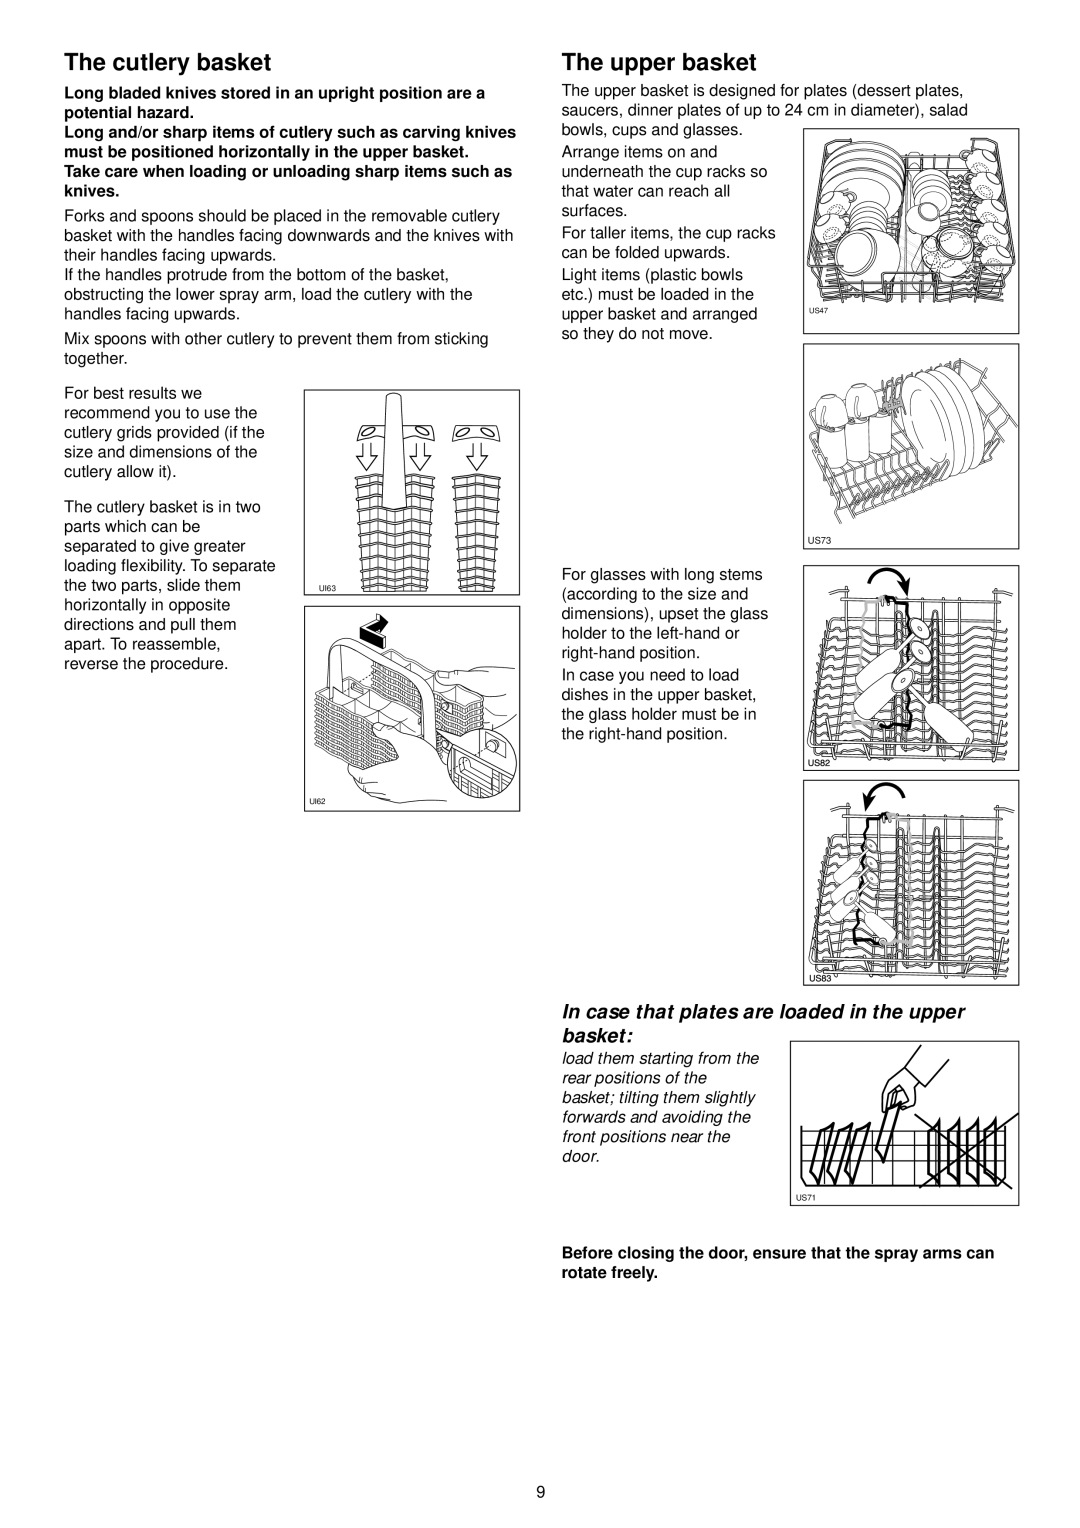 Zanussi ZSF 6161 S manual The cutlery basket, The upper basket, In case that plates are loaded in the upper basket 